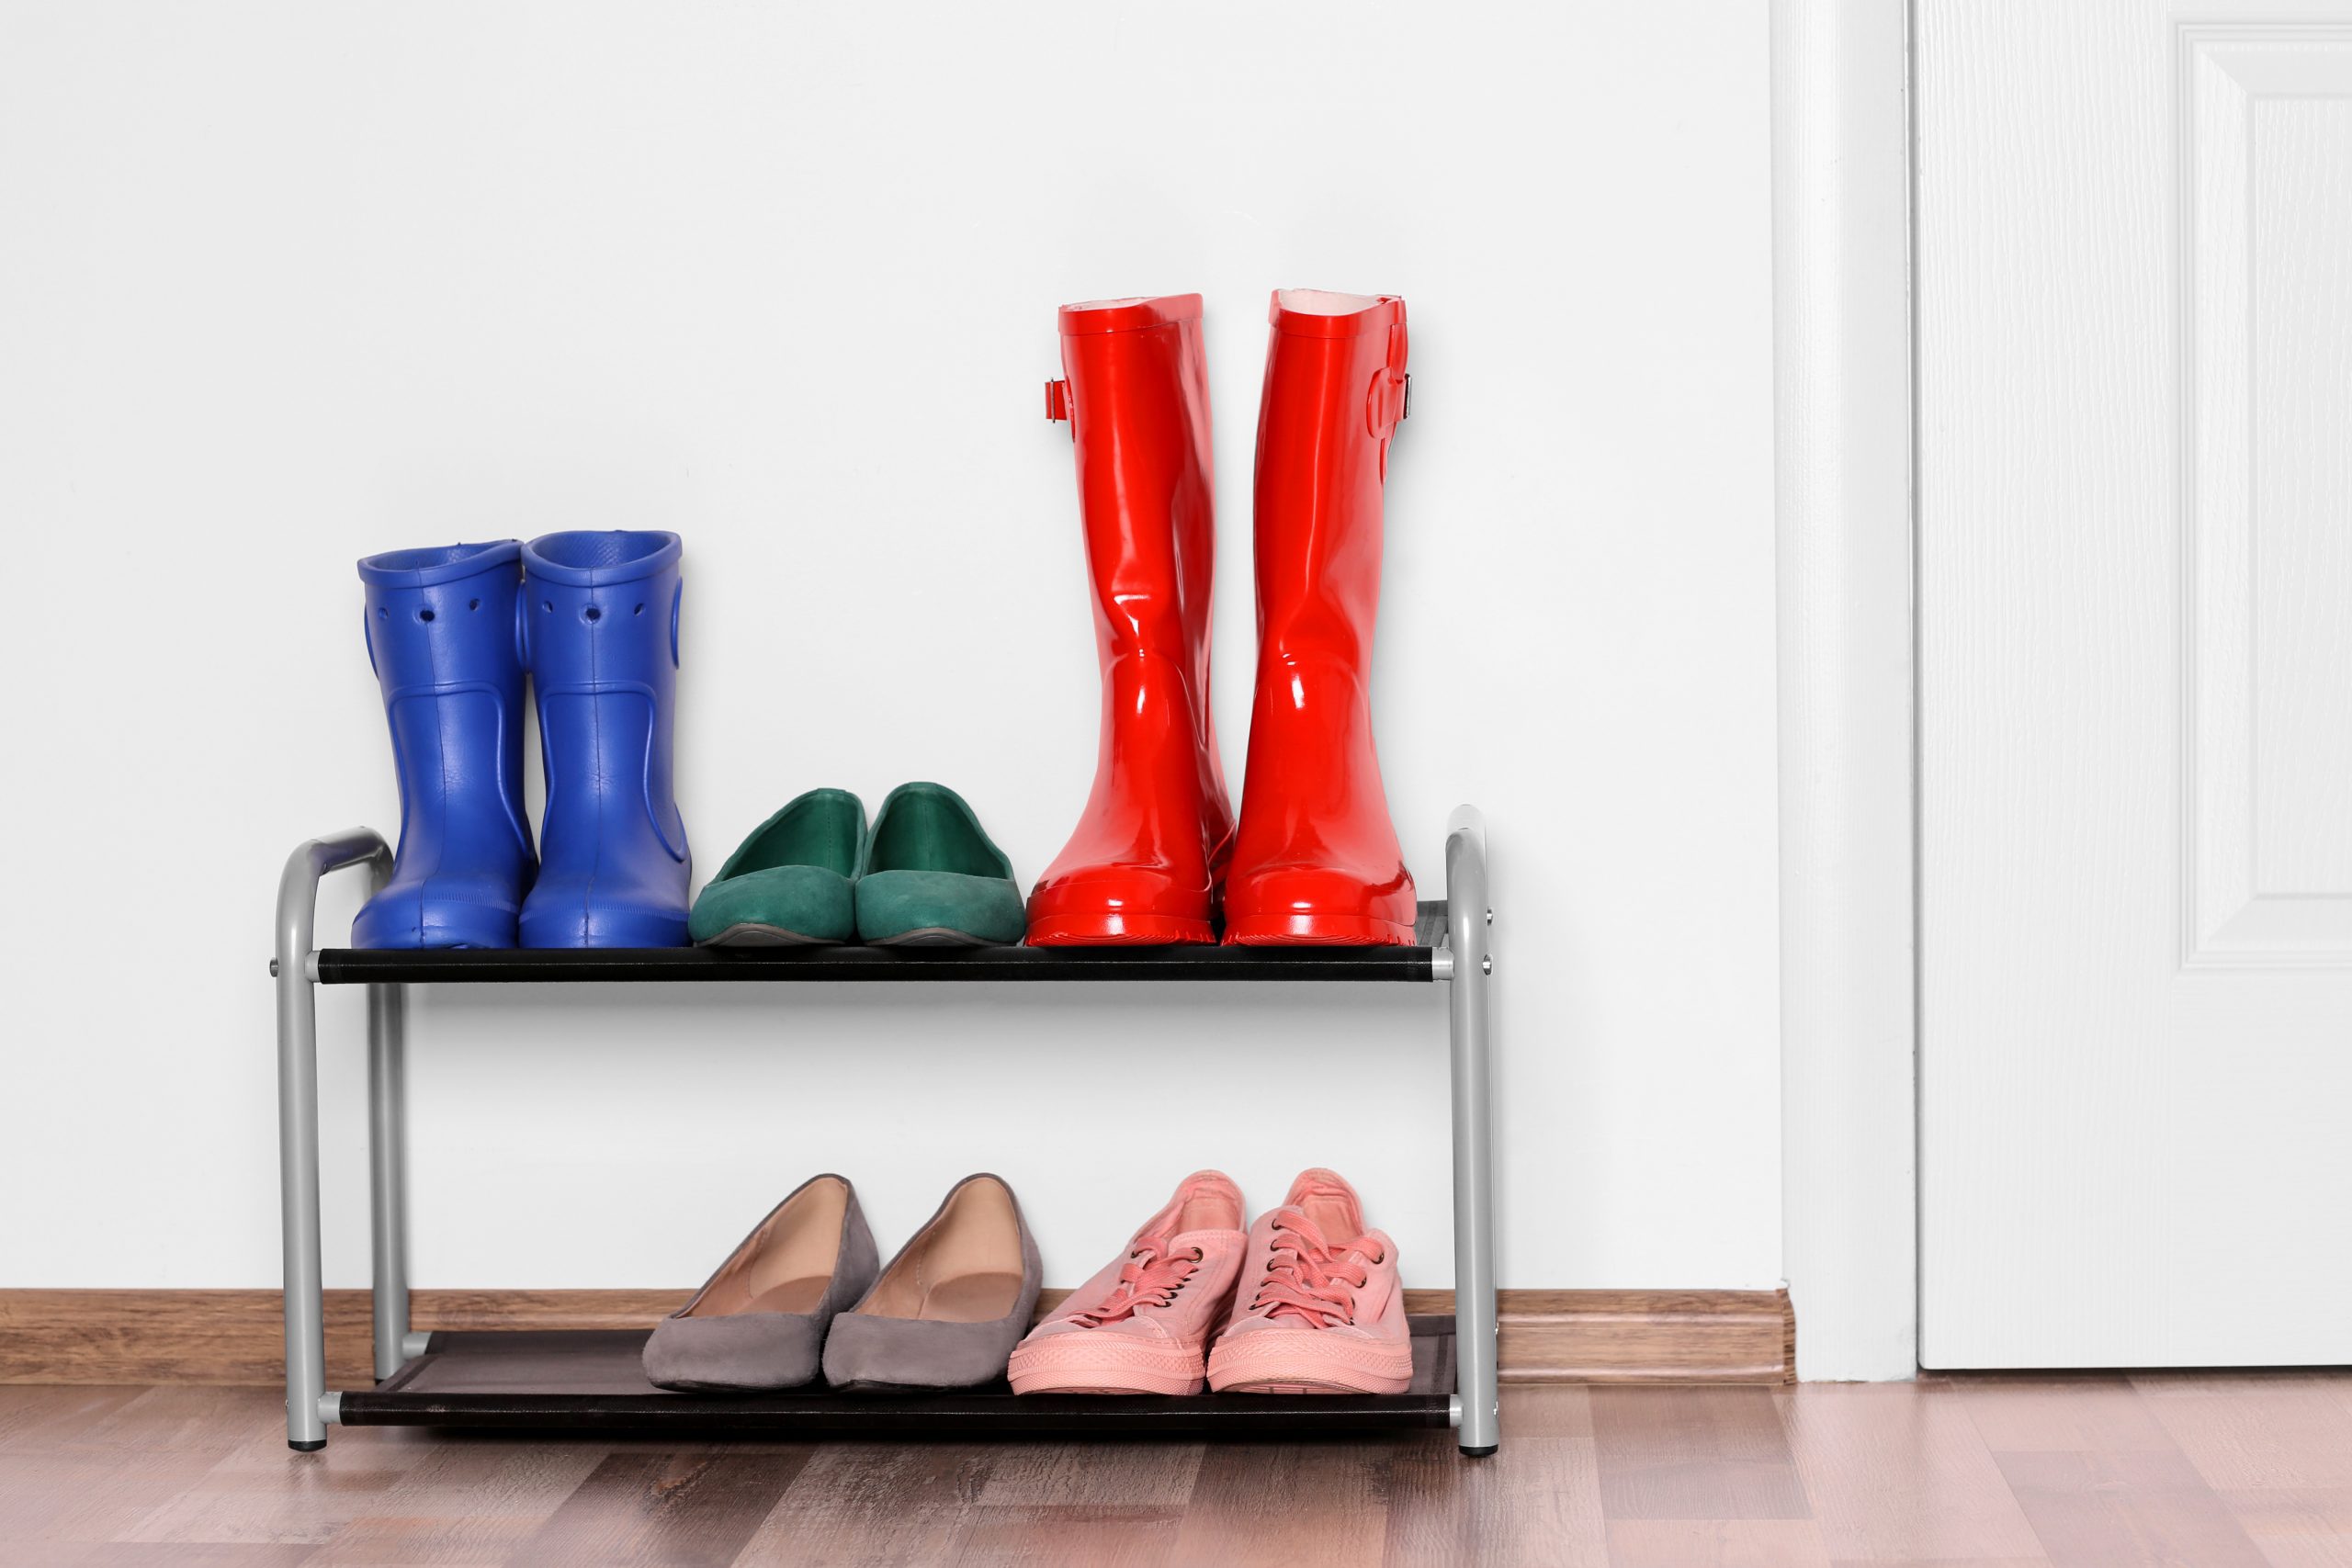 Different shoes on shelf near wall